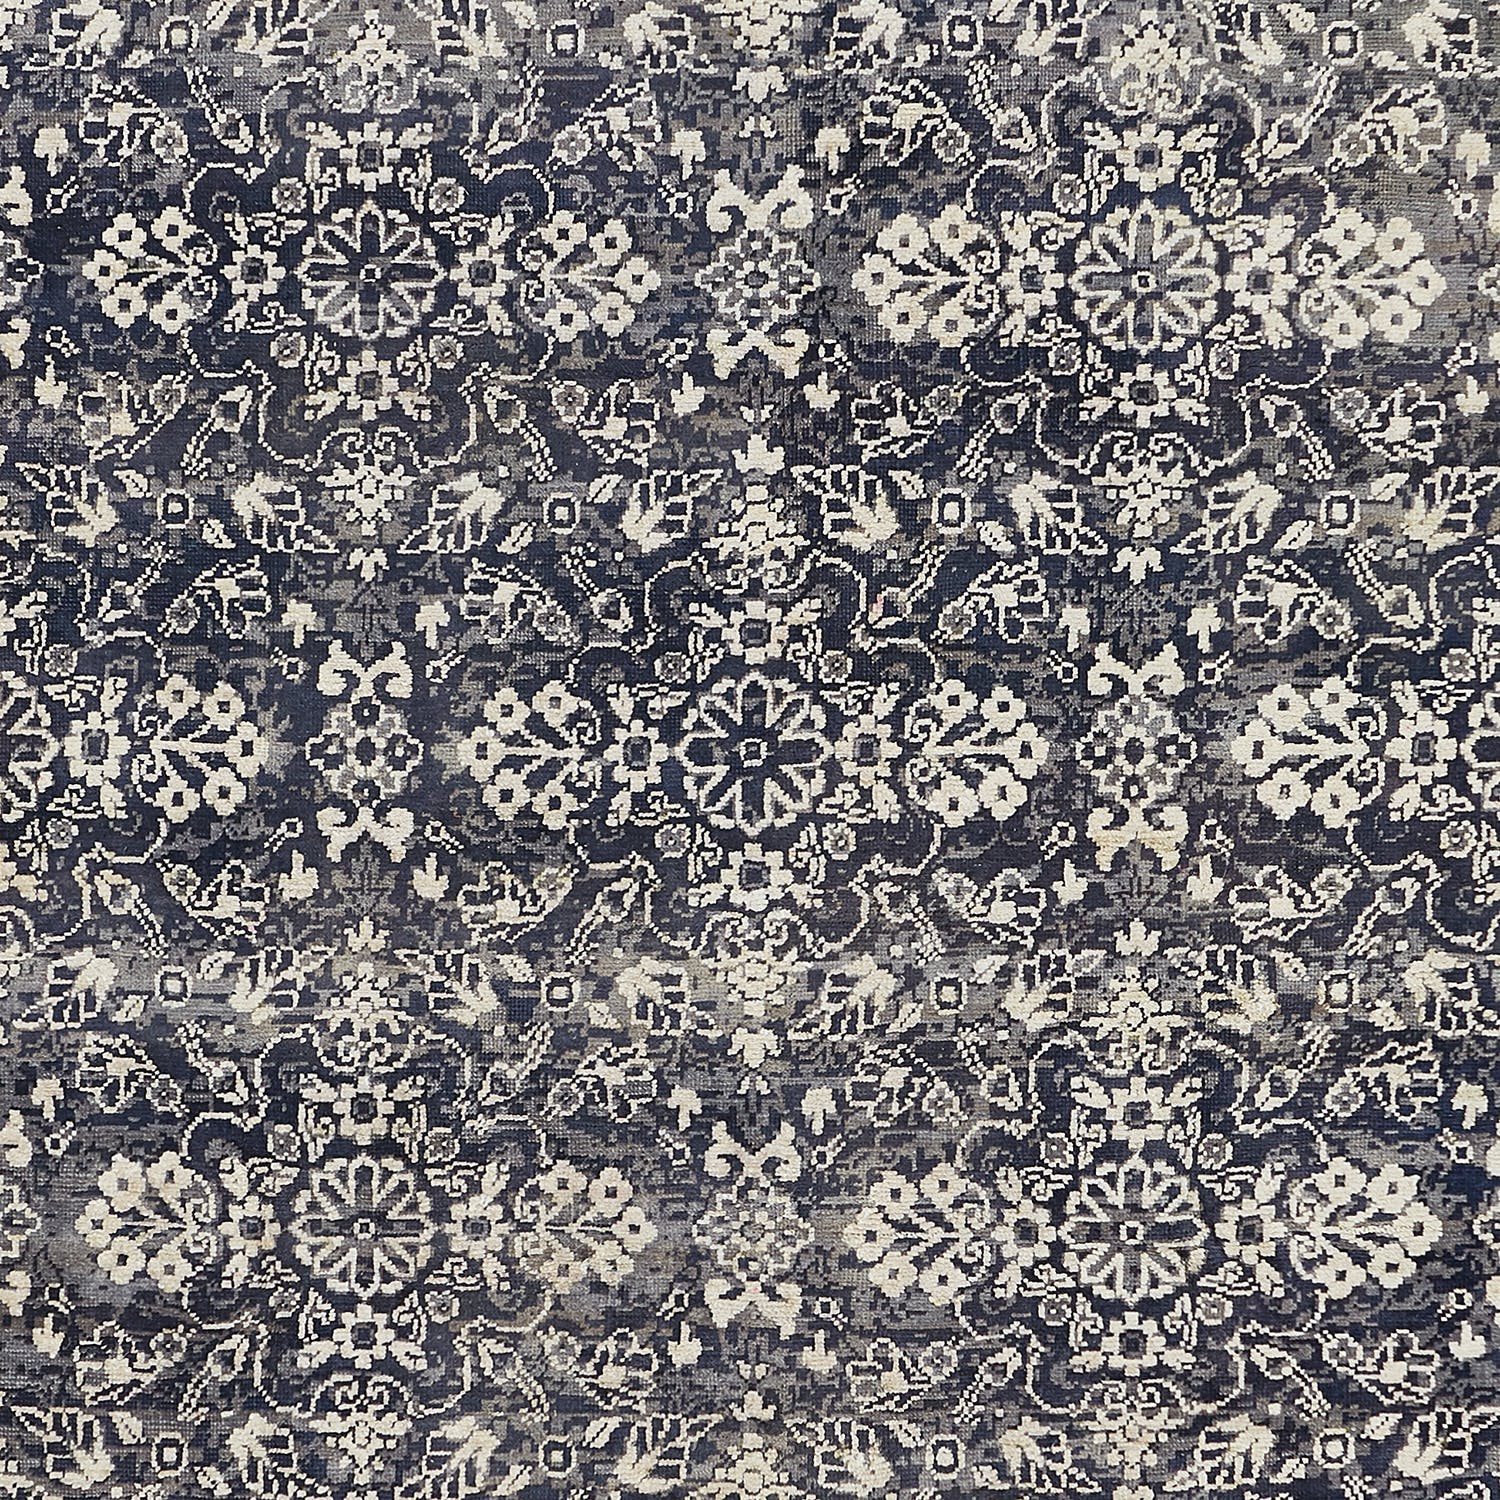 Intricately designed carpet with floral and geometric motifs in monochromatic tones.